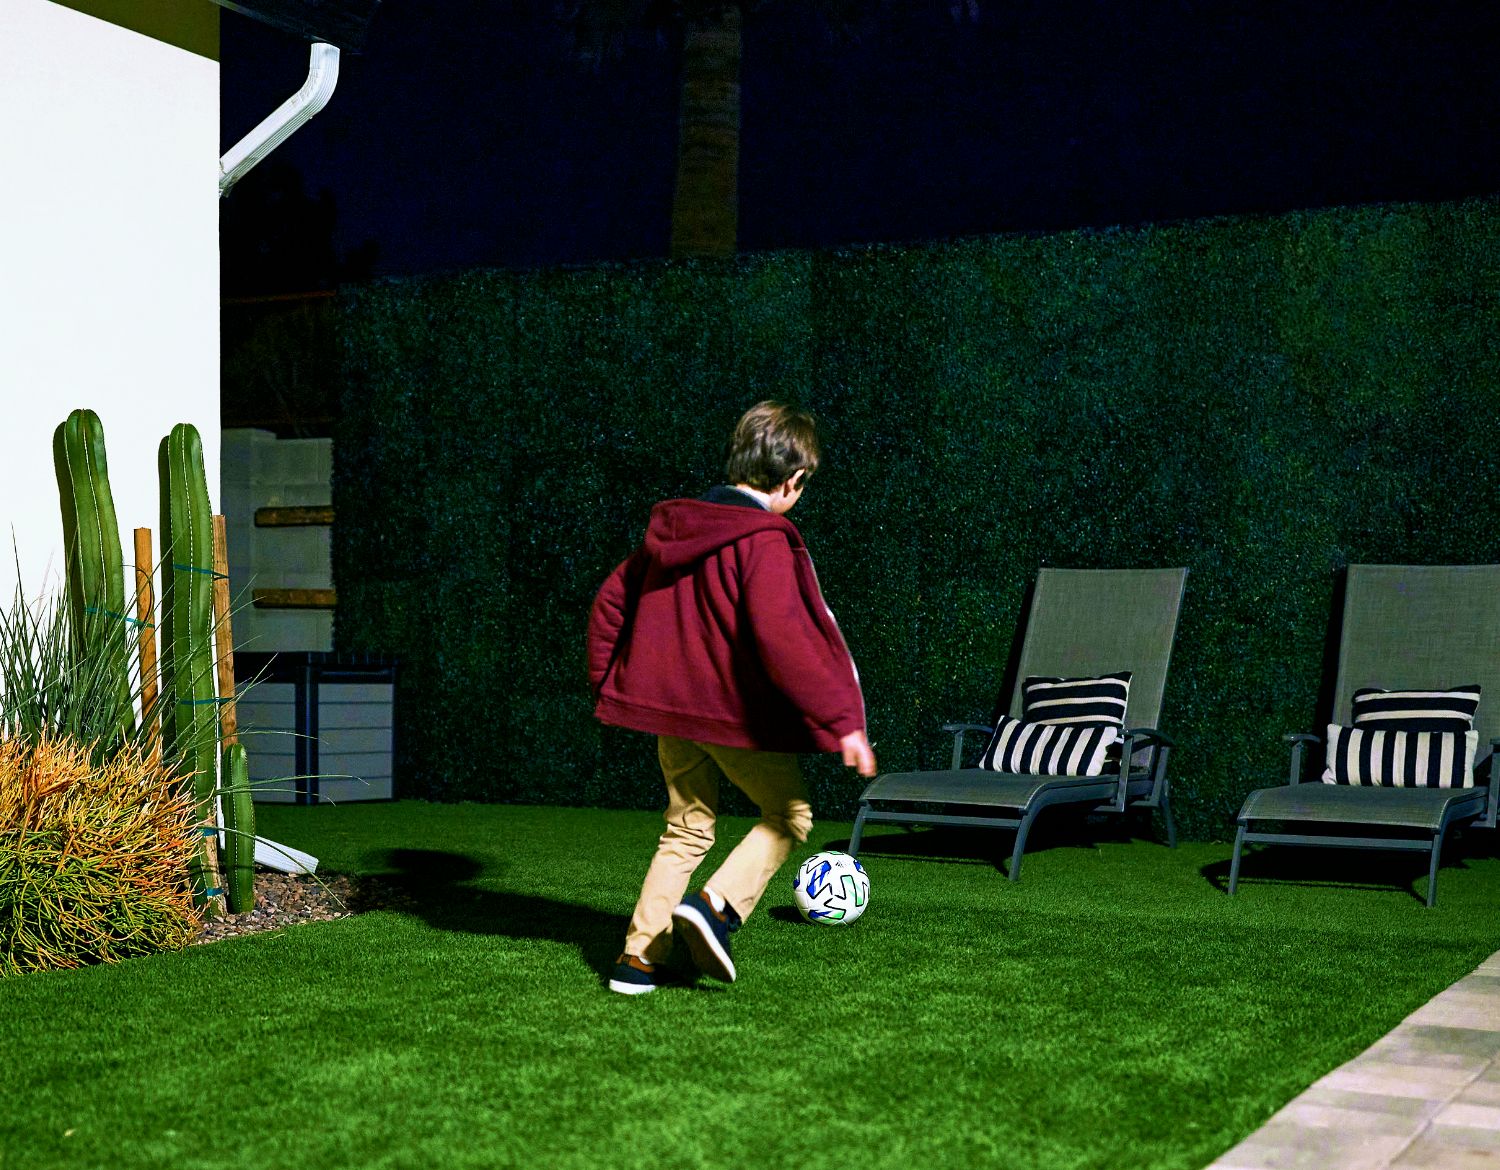 A young boy in the garden at night plays football in the garden